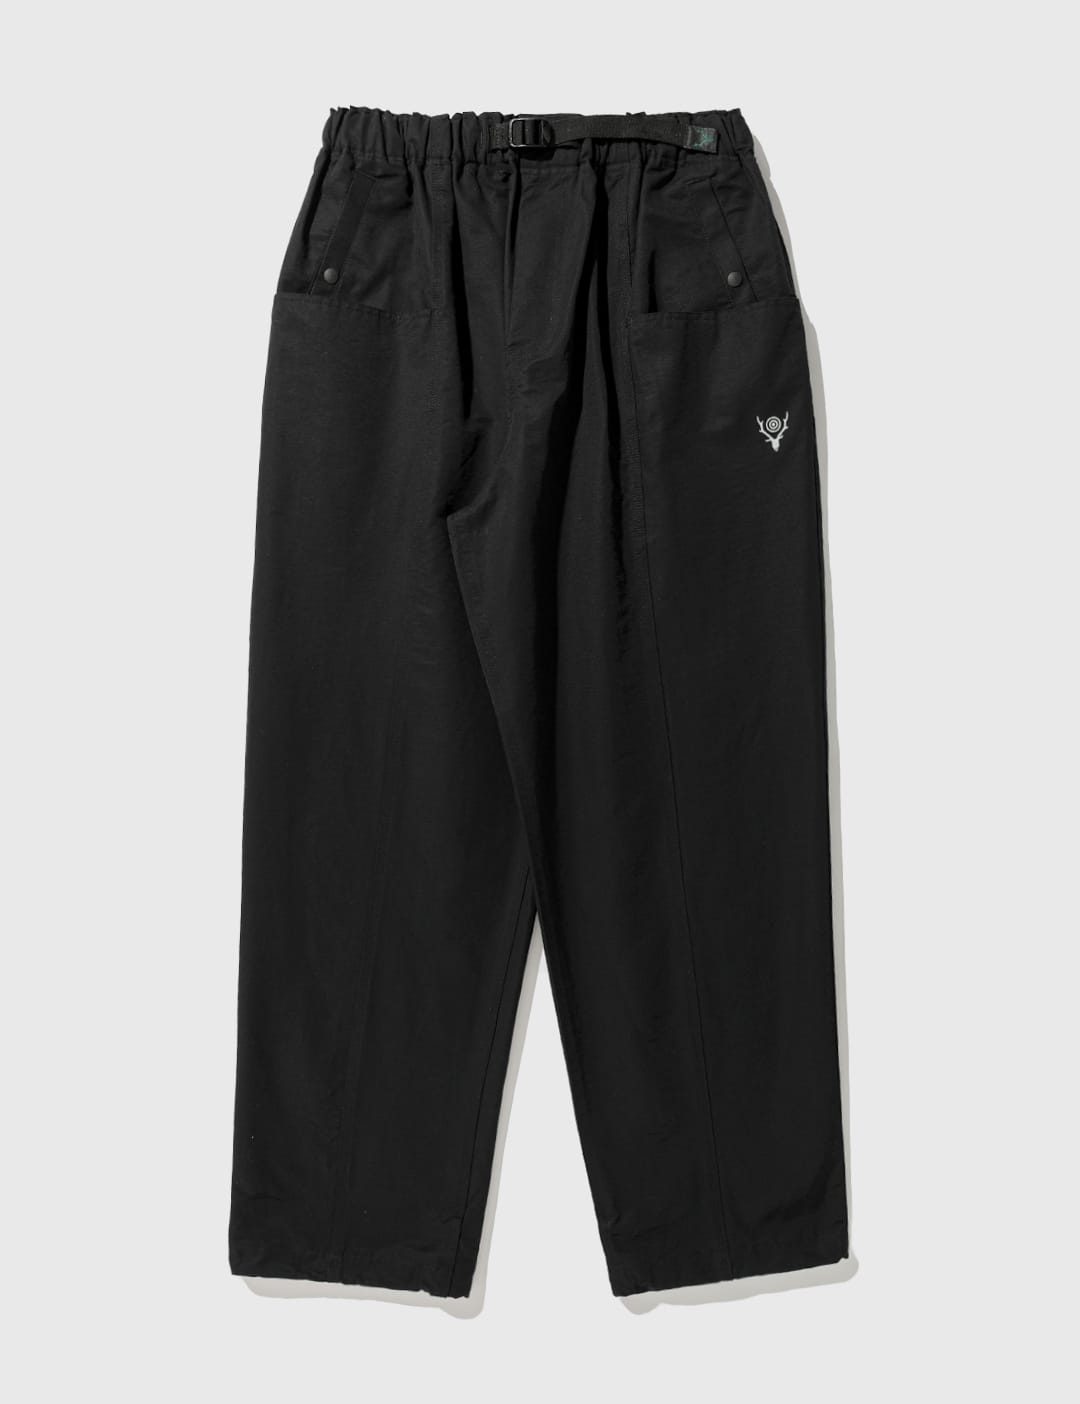 South2 West8 - Belted C.S. Pants | HBX - Globally Curated Fashion